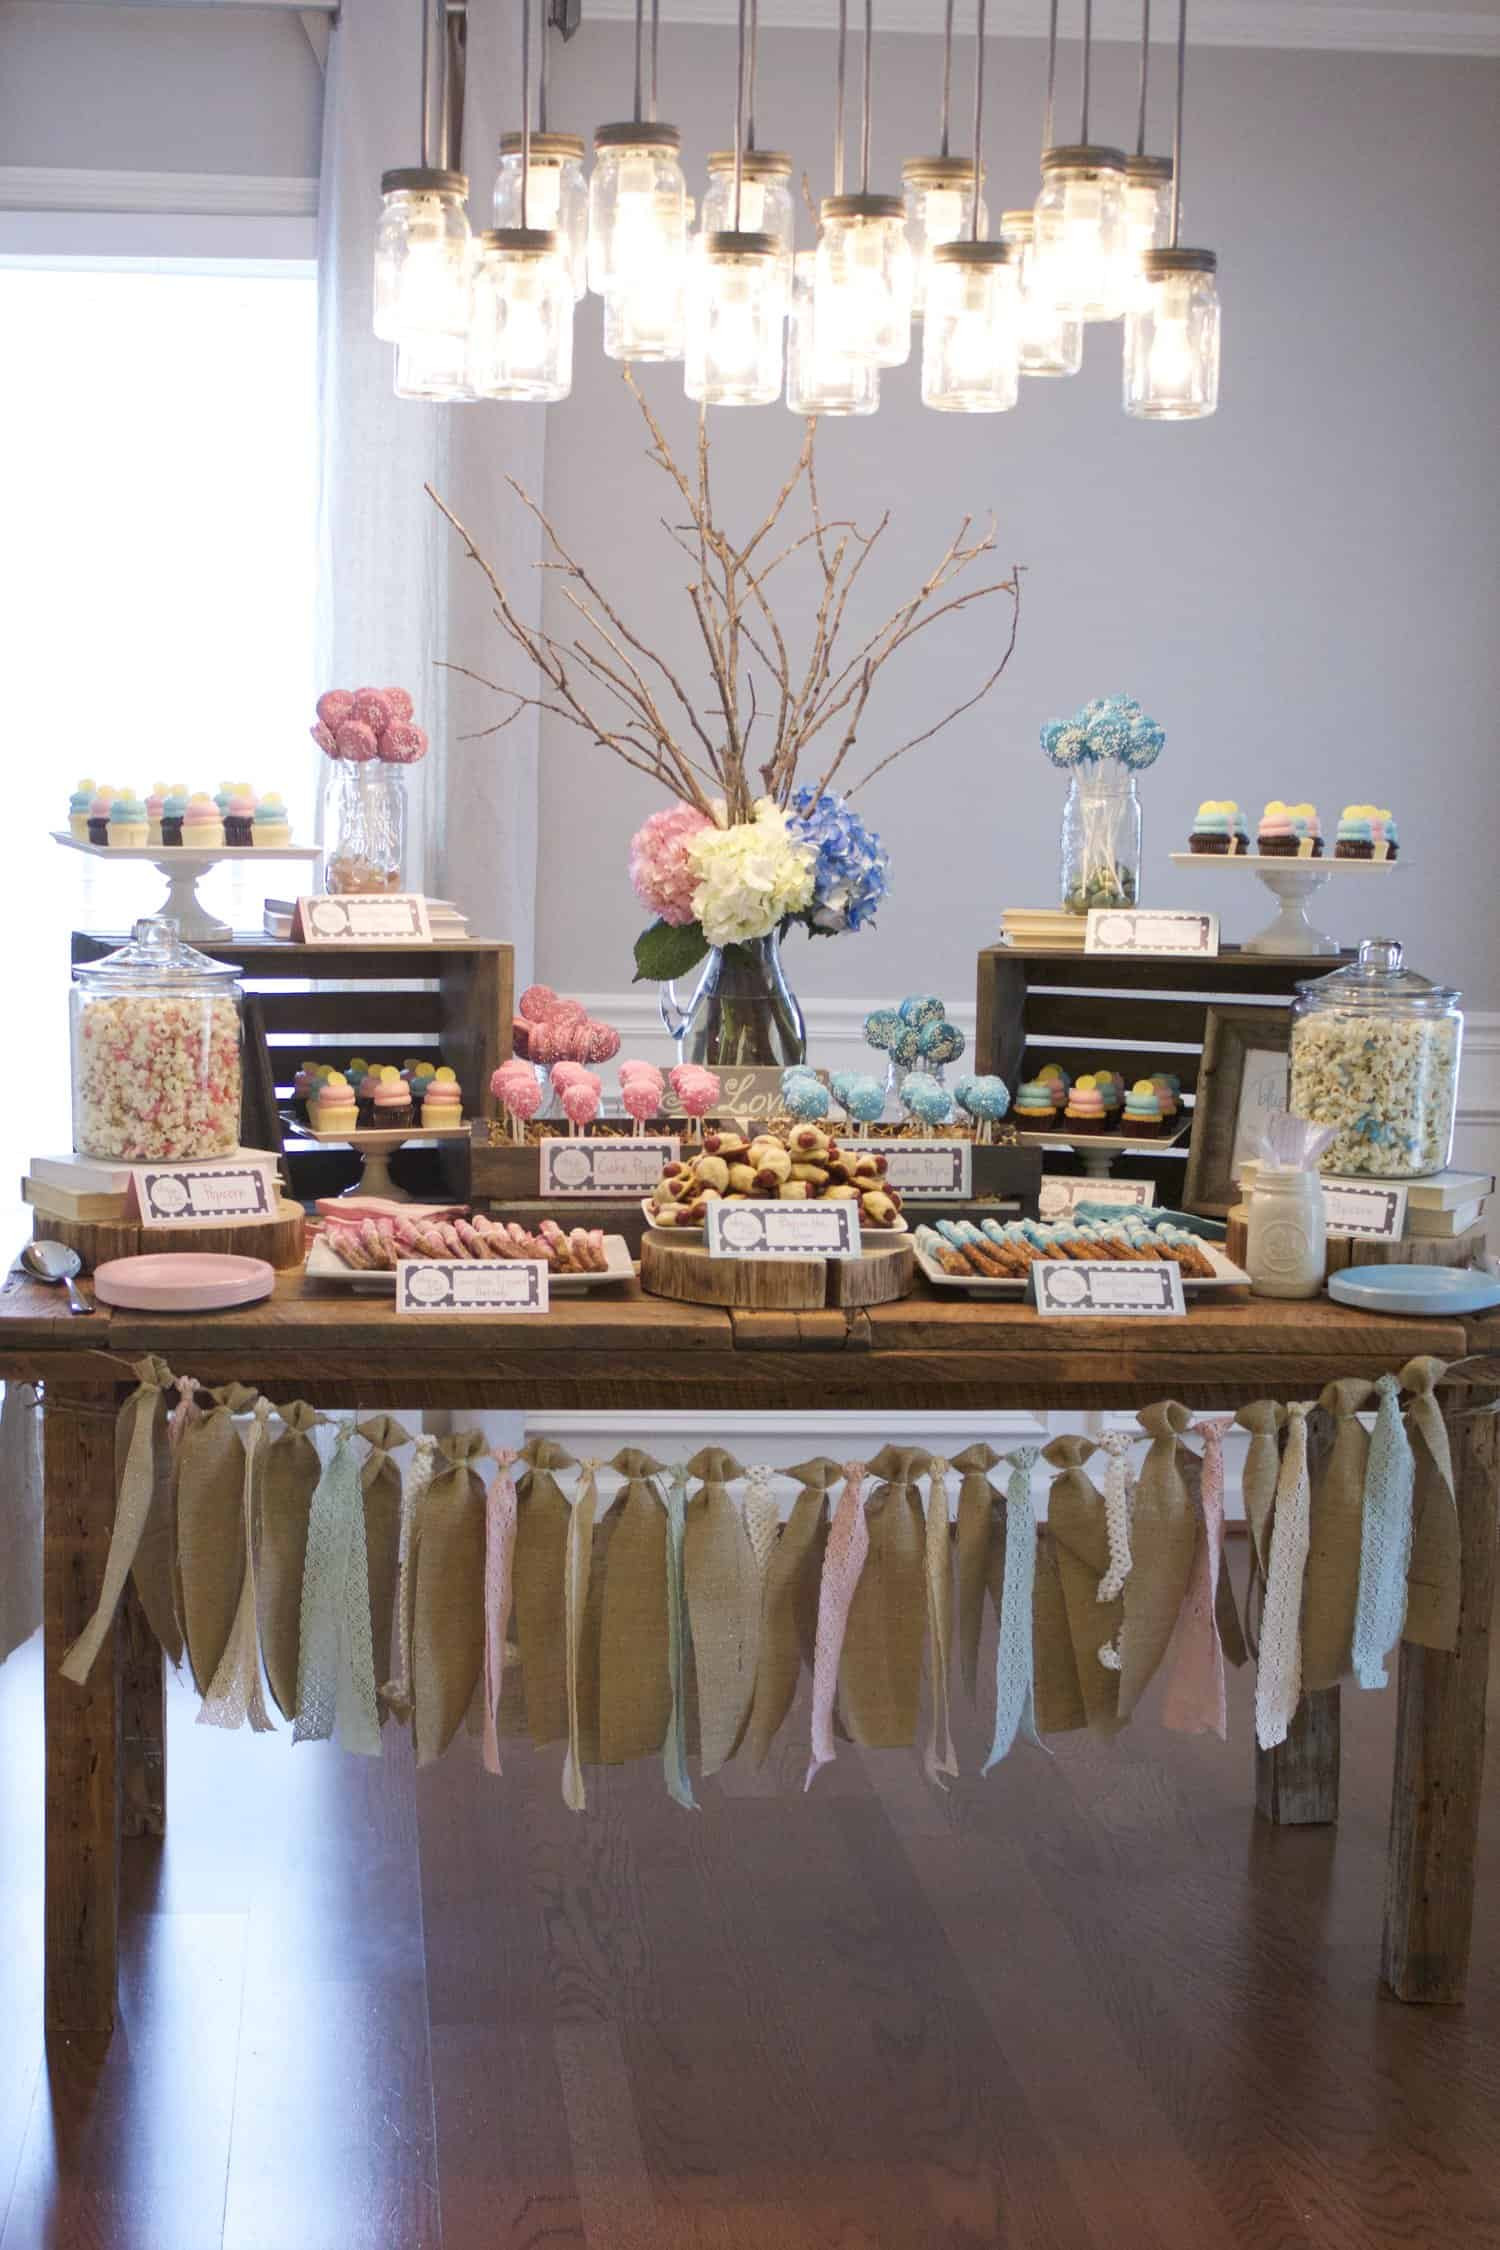 Baby Gender Reveal Party Ideas Pinterest
 17 Tips To Throw An Unfor table Gender Reveal Party